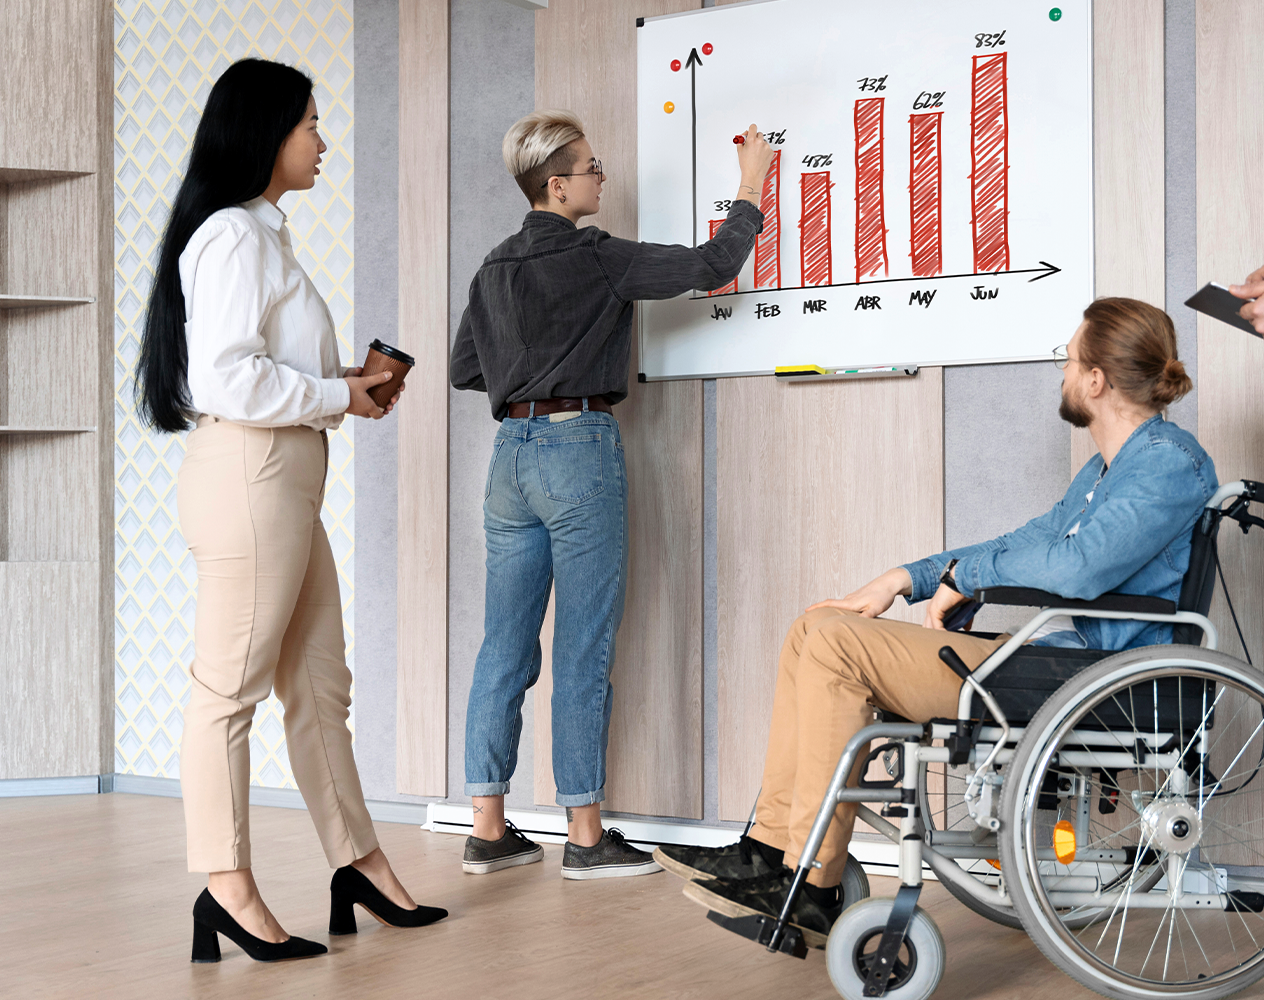 Picture of a woman drawing a bar graph on a whiteboard, while another woman and a man in a wheel chair look on.